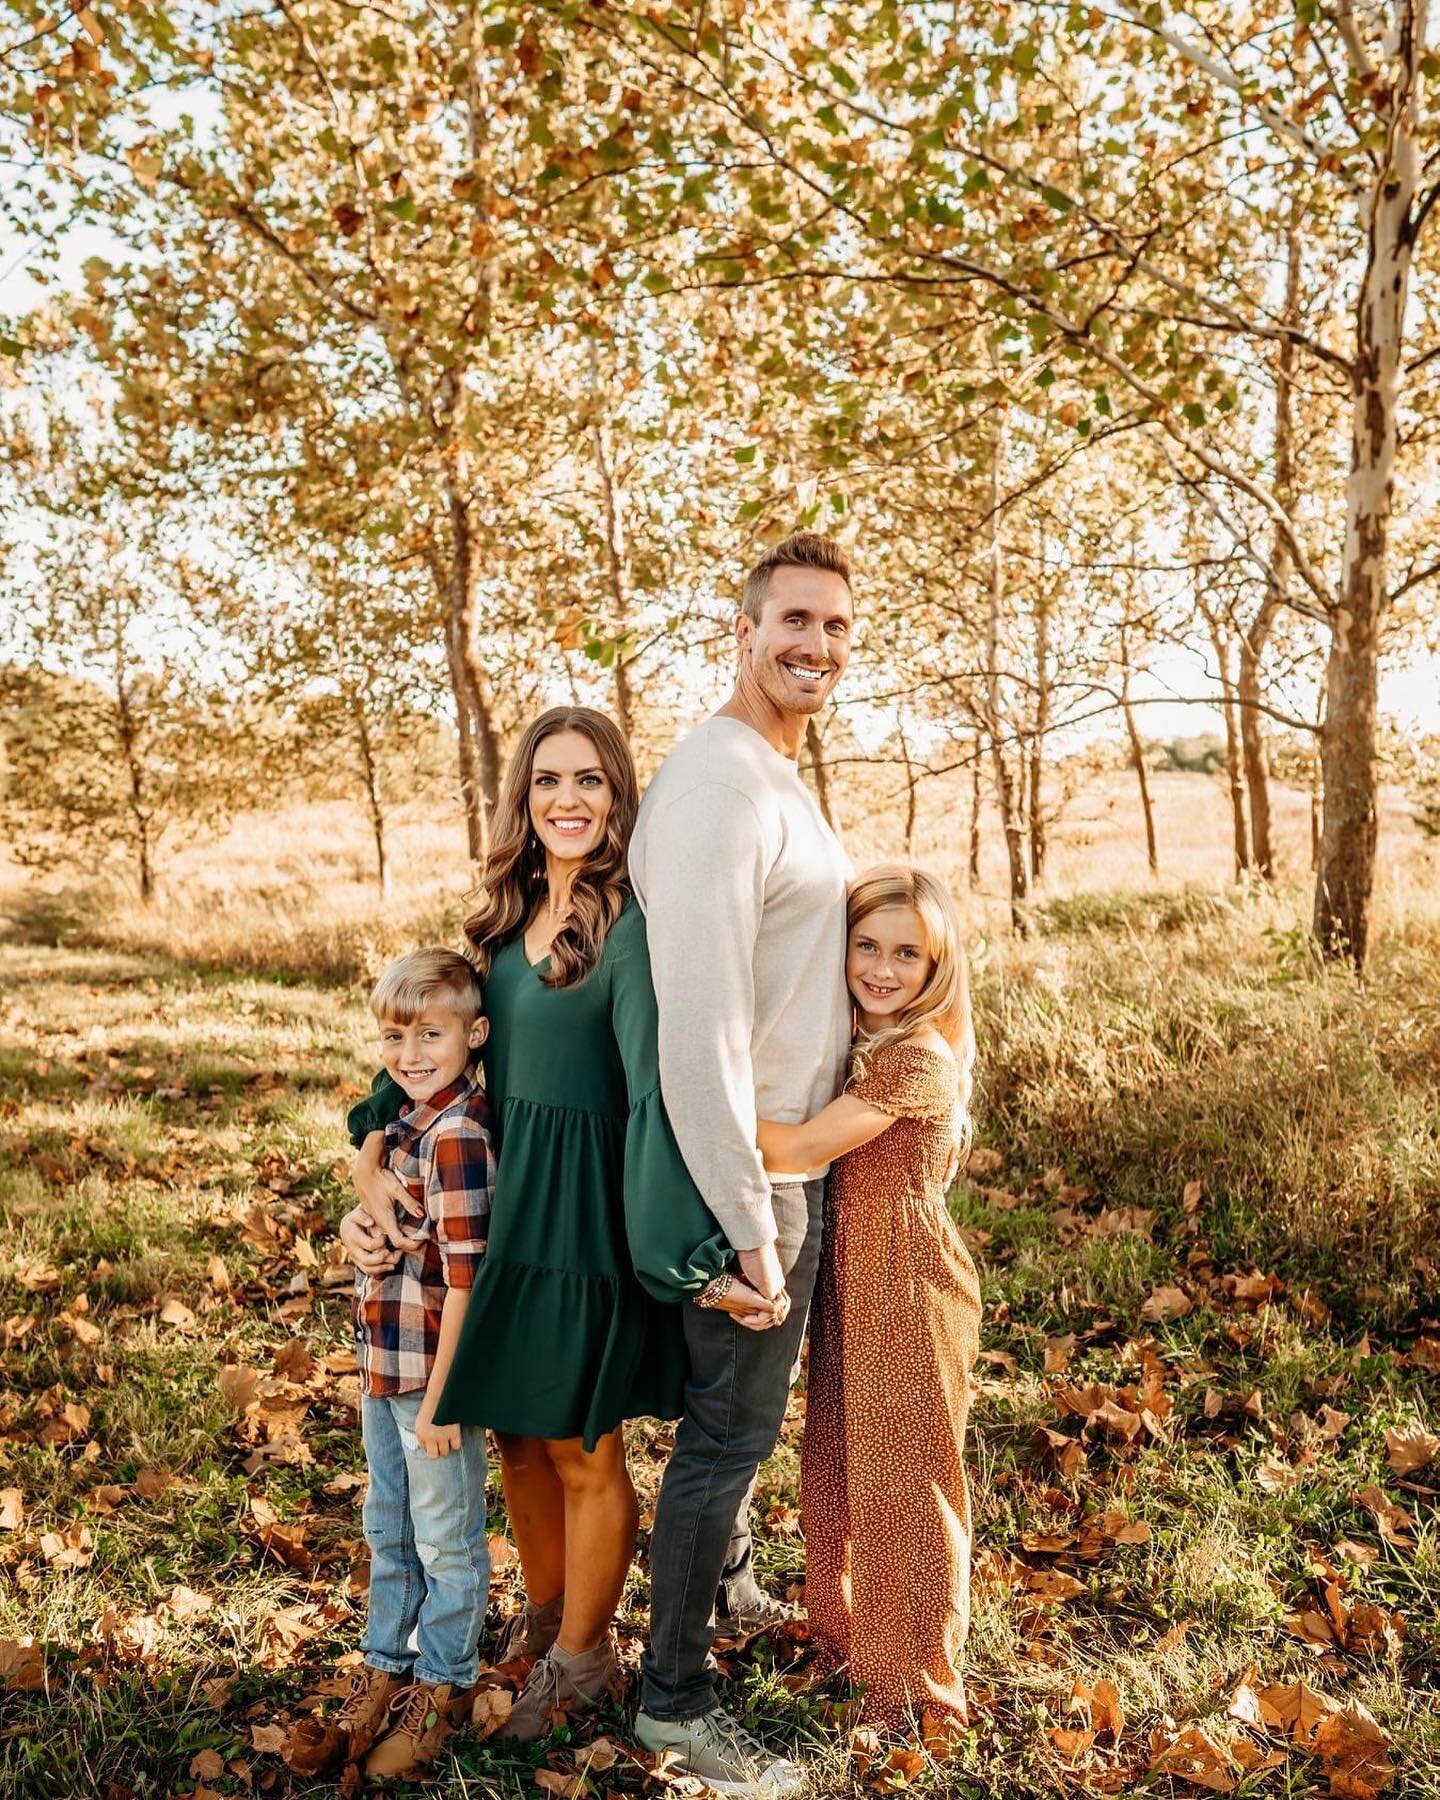 Slowly updating Instagram, as usual! These four make one beautiful family!
-

#familyportraits #photographybykatiesue #pbyks #ltal #desmoines #iowaphotographer #iowaphotography #familyphotographer #family #childportraits #childphotography #iowa #chil